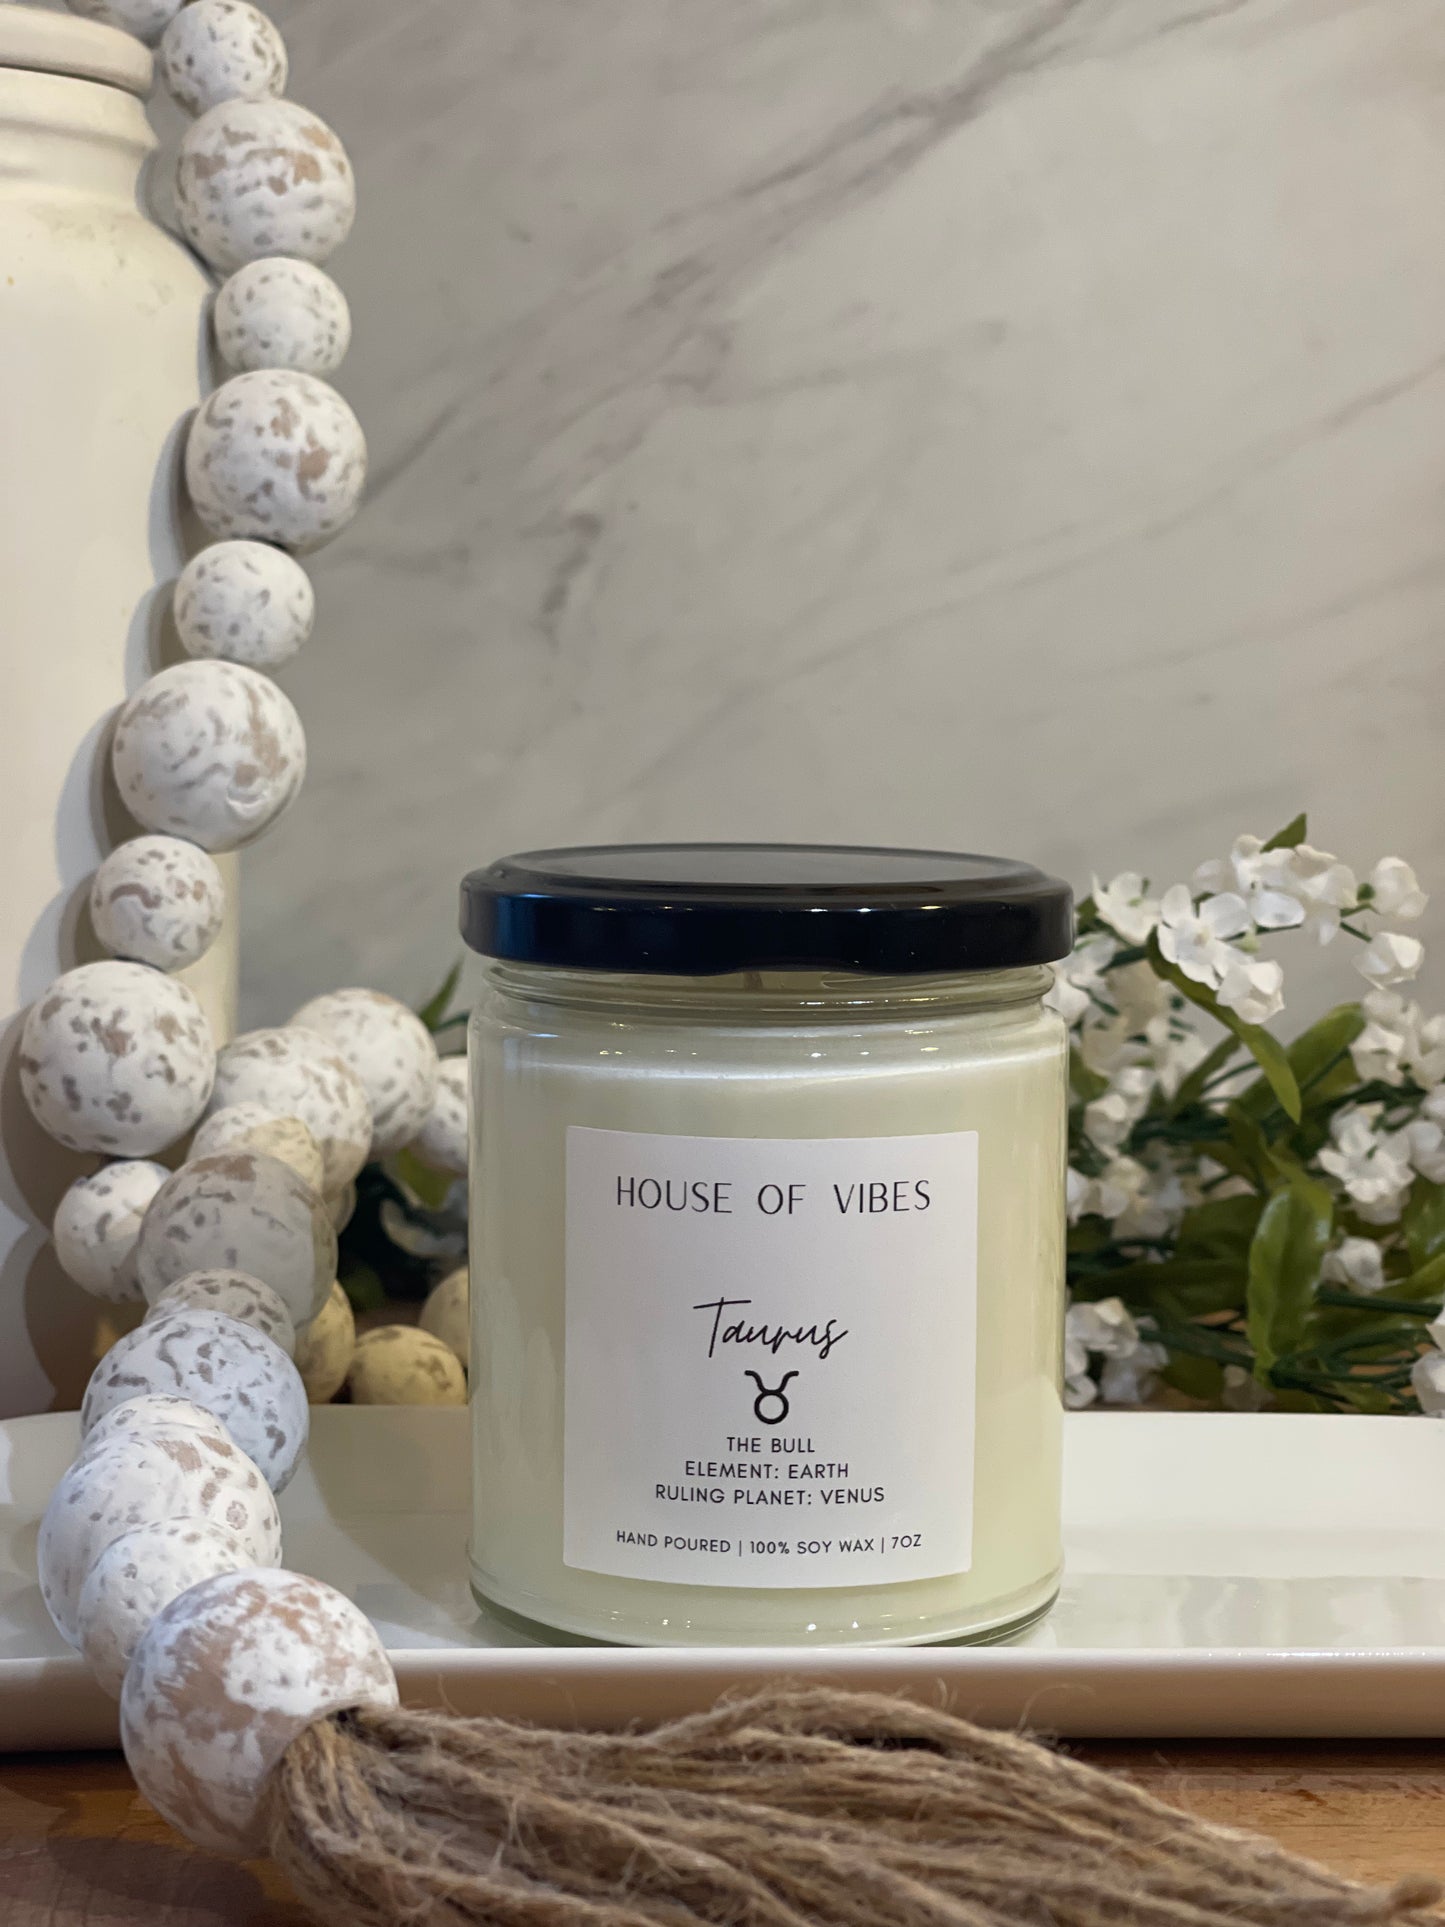 Taurus Scented Zodiac Sign Candle